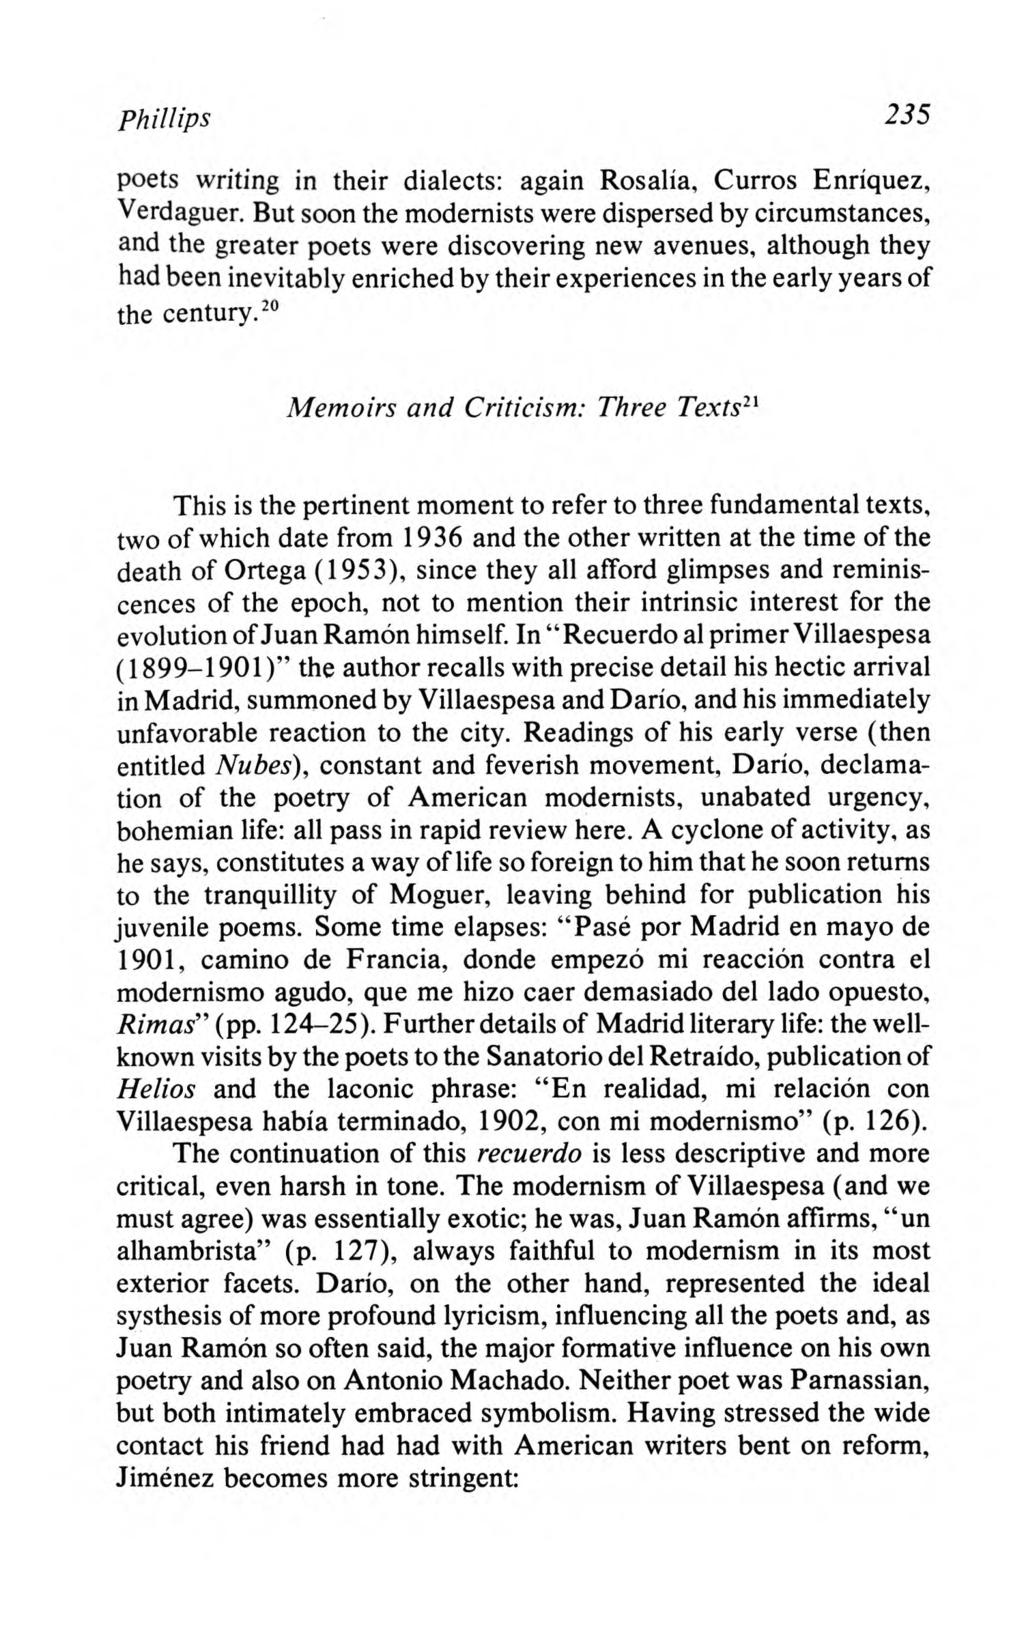 Phillips: The Literary Criticism and Memoirs of Juan Ramón Jiménez Phillips 235 poets writing in their dialects: again Rosalia, Curros Enriquez, Verdaguer.